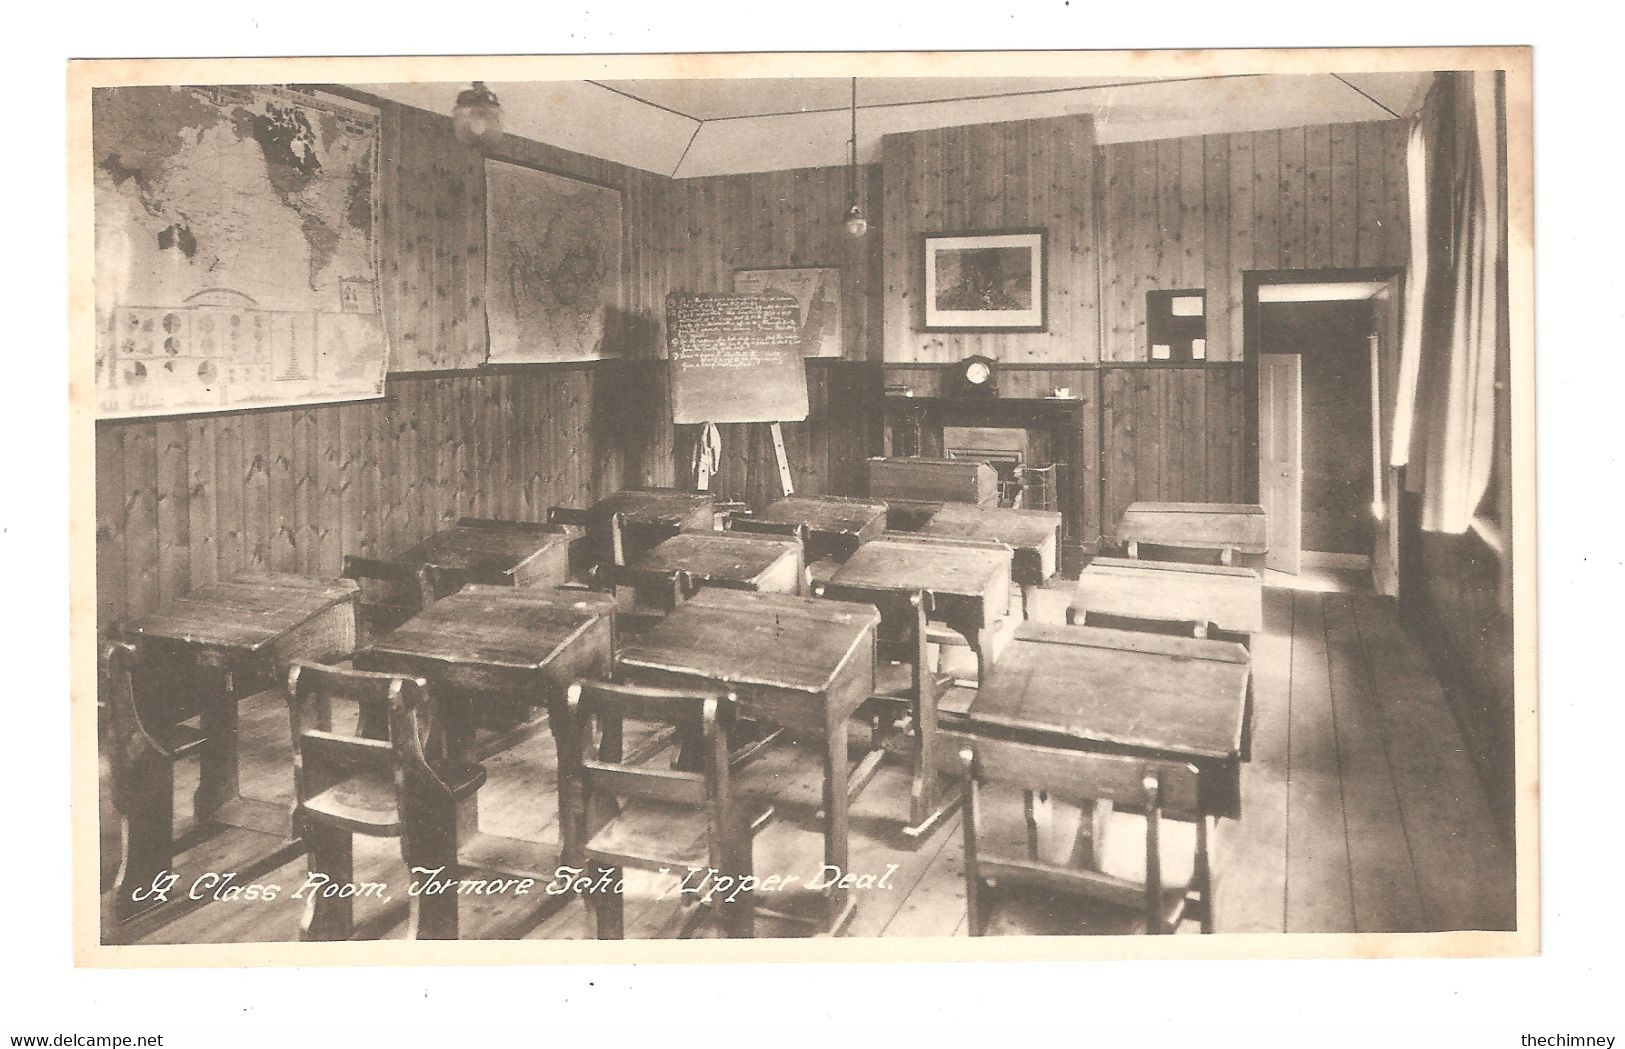 Map On The Left Wall A CLASS ROOM TORMORE SCHOOL UPPER DEAL WALMER KENT UNUSED MARSHALL KEENE & CO - Cartes Géographiques